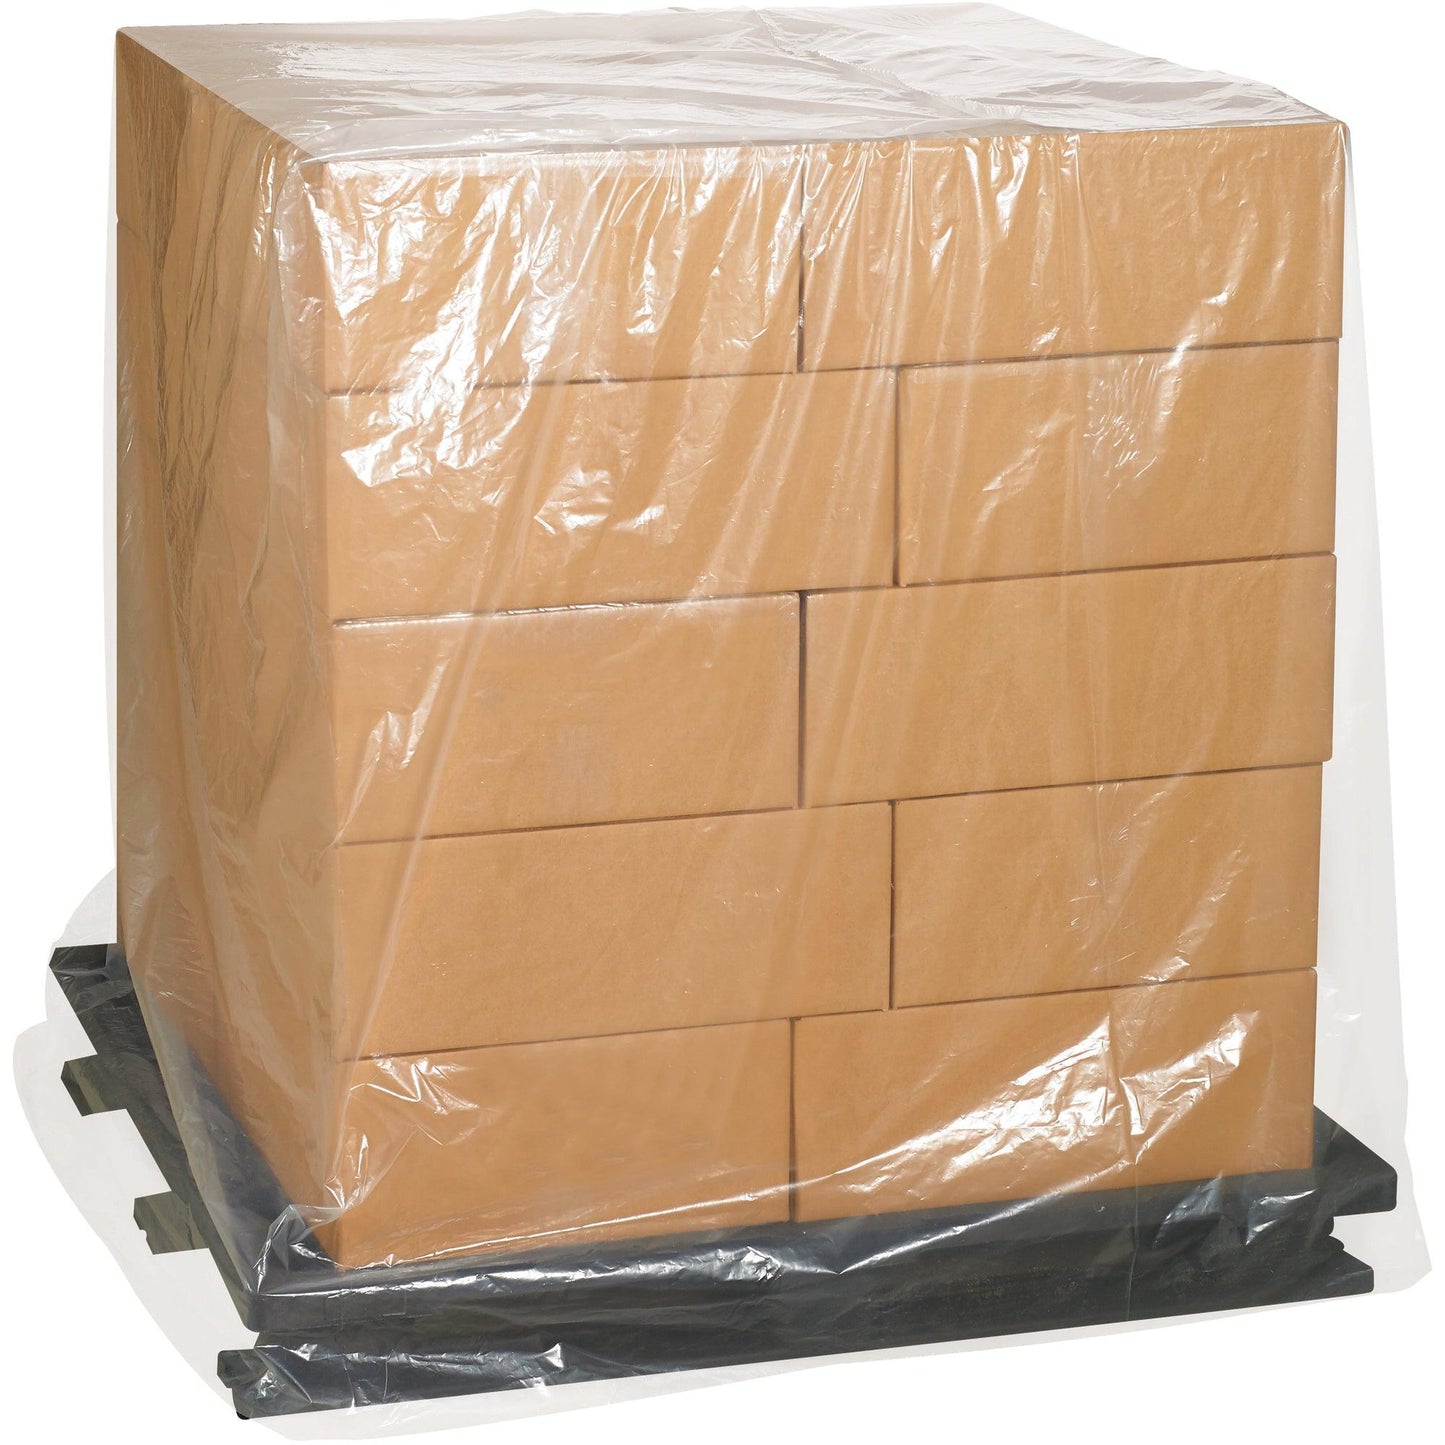 48 x 42 x 48" - 2 Mil Clear Pallet Covers - PC515